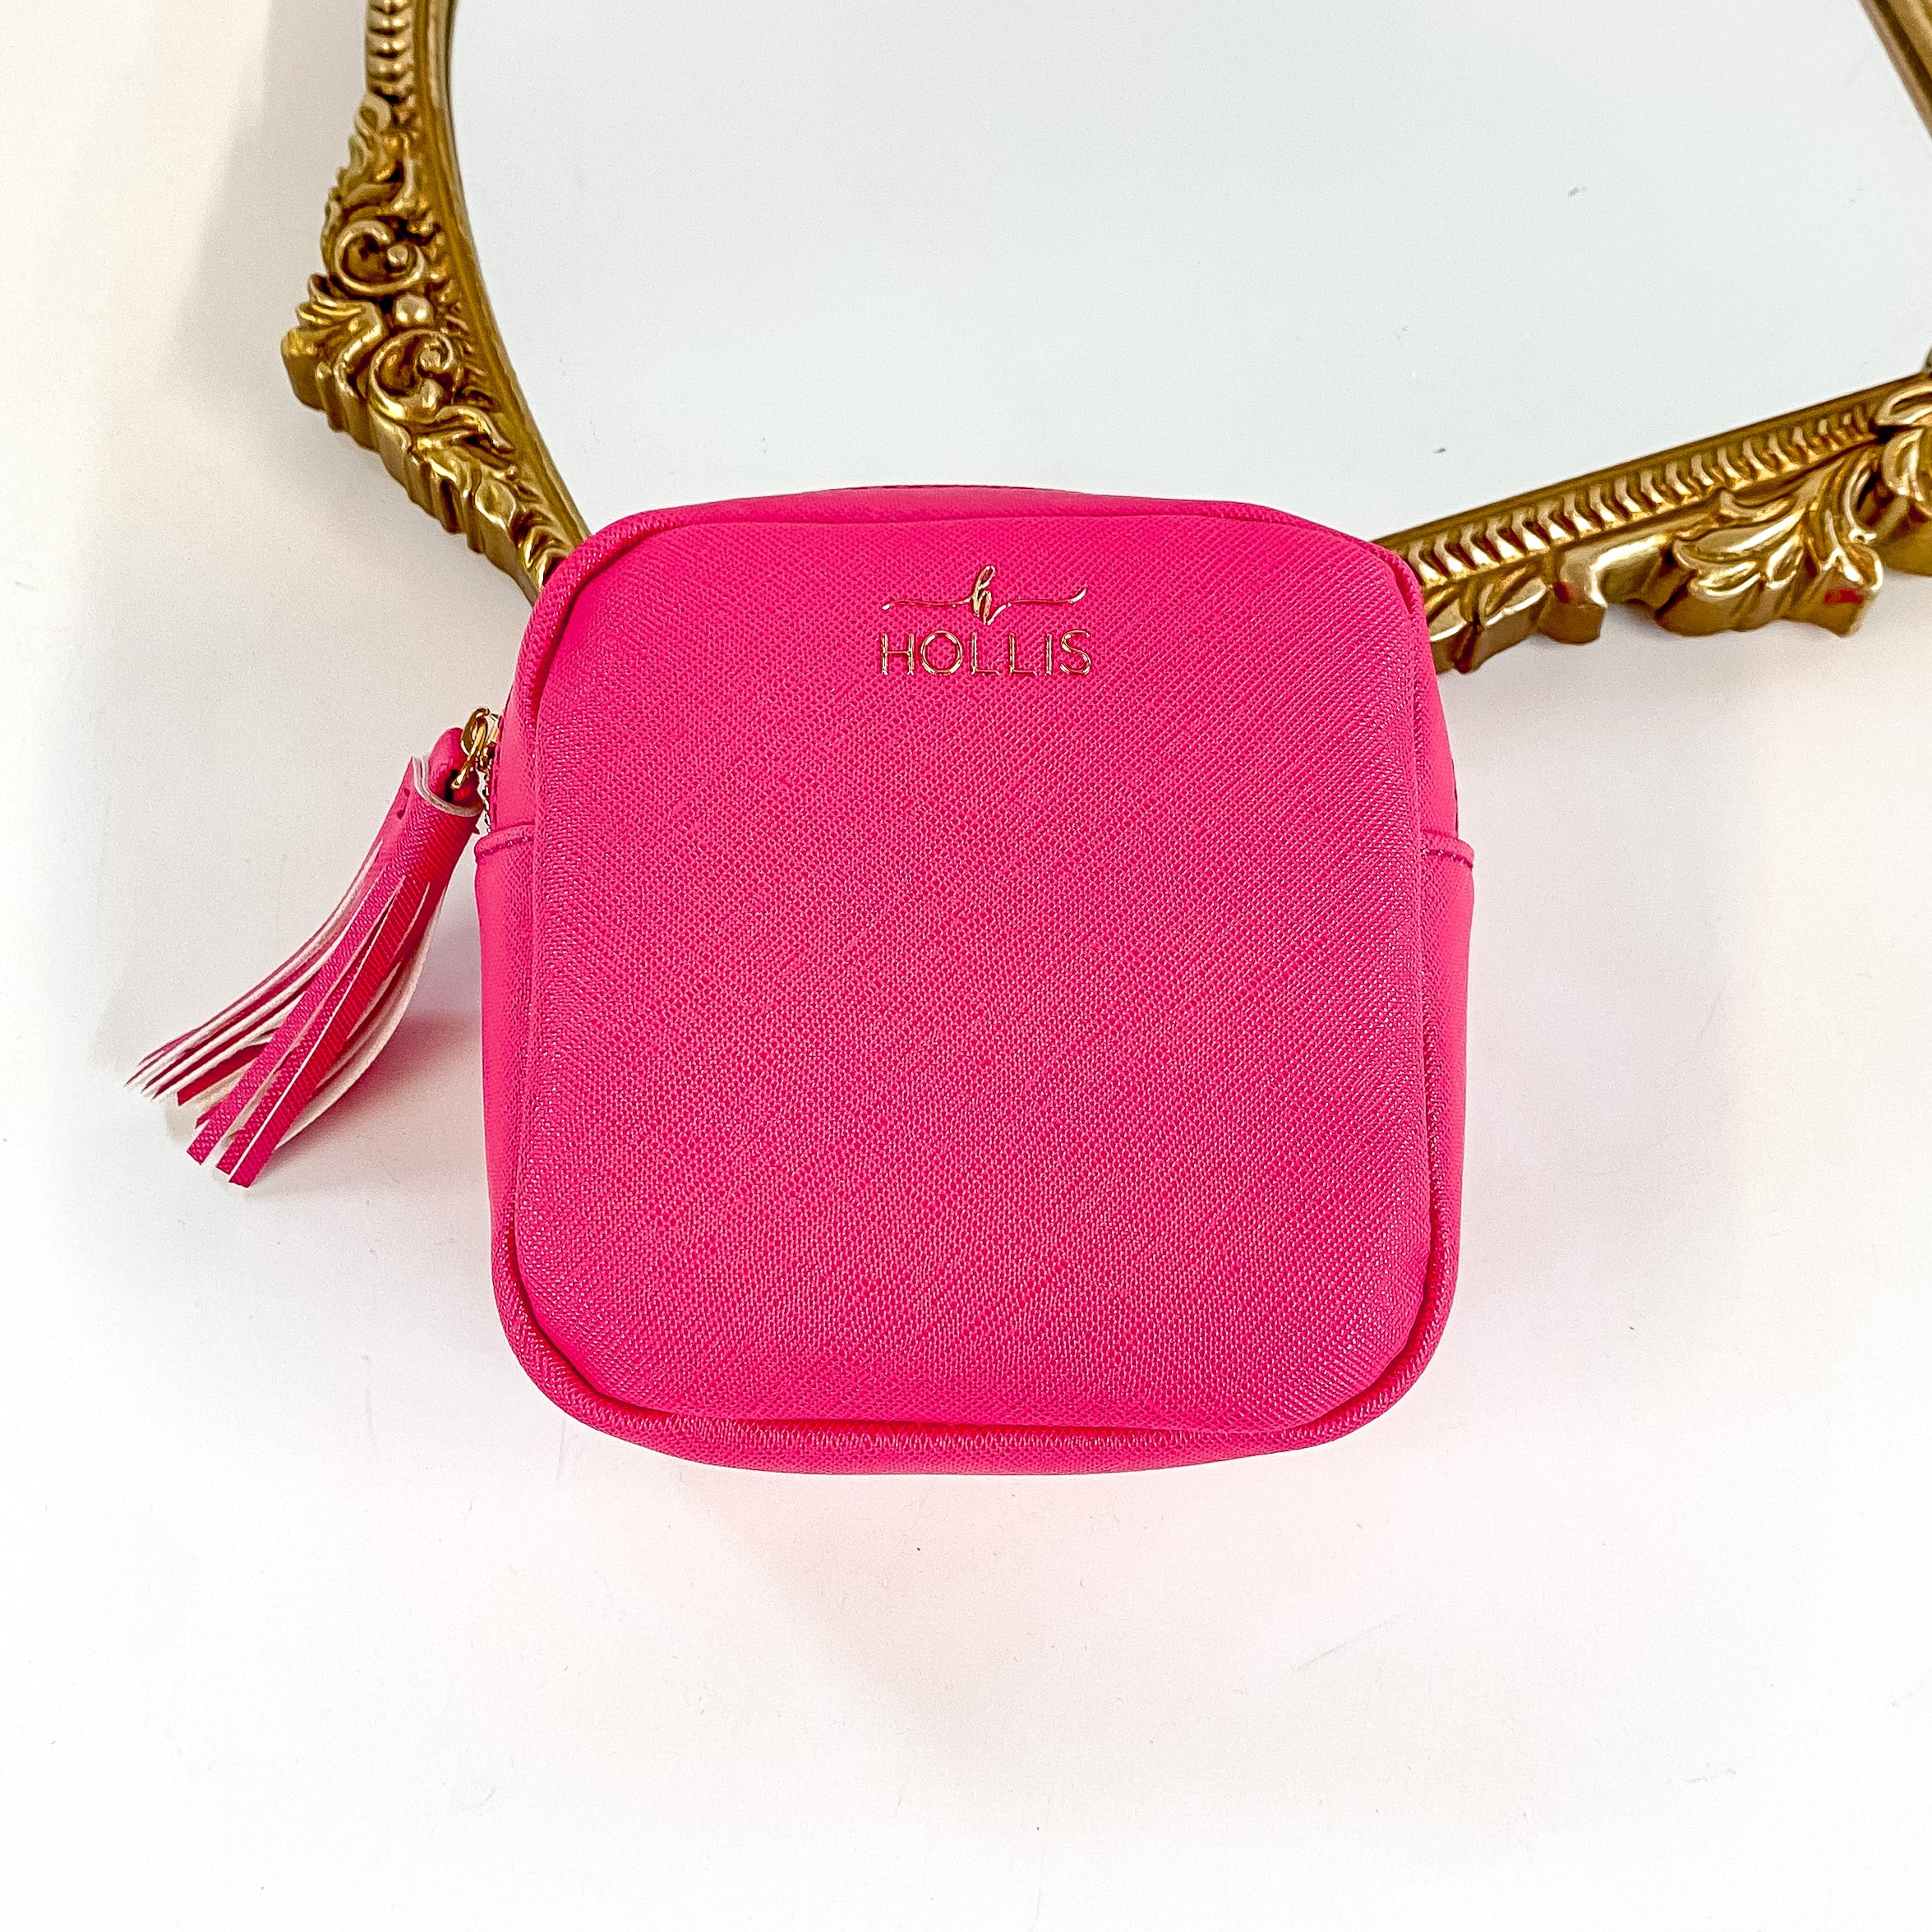 Hollis brand technology organizer in hot pink. Smaller square zip up bag. Pictured on a white background with a frame behind the bag.